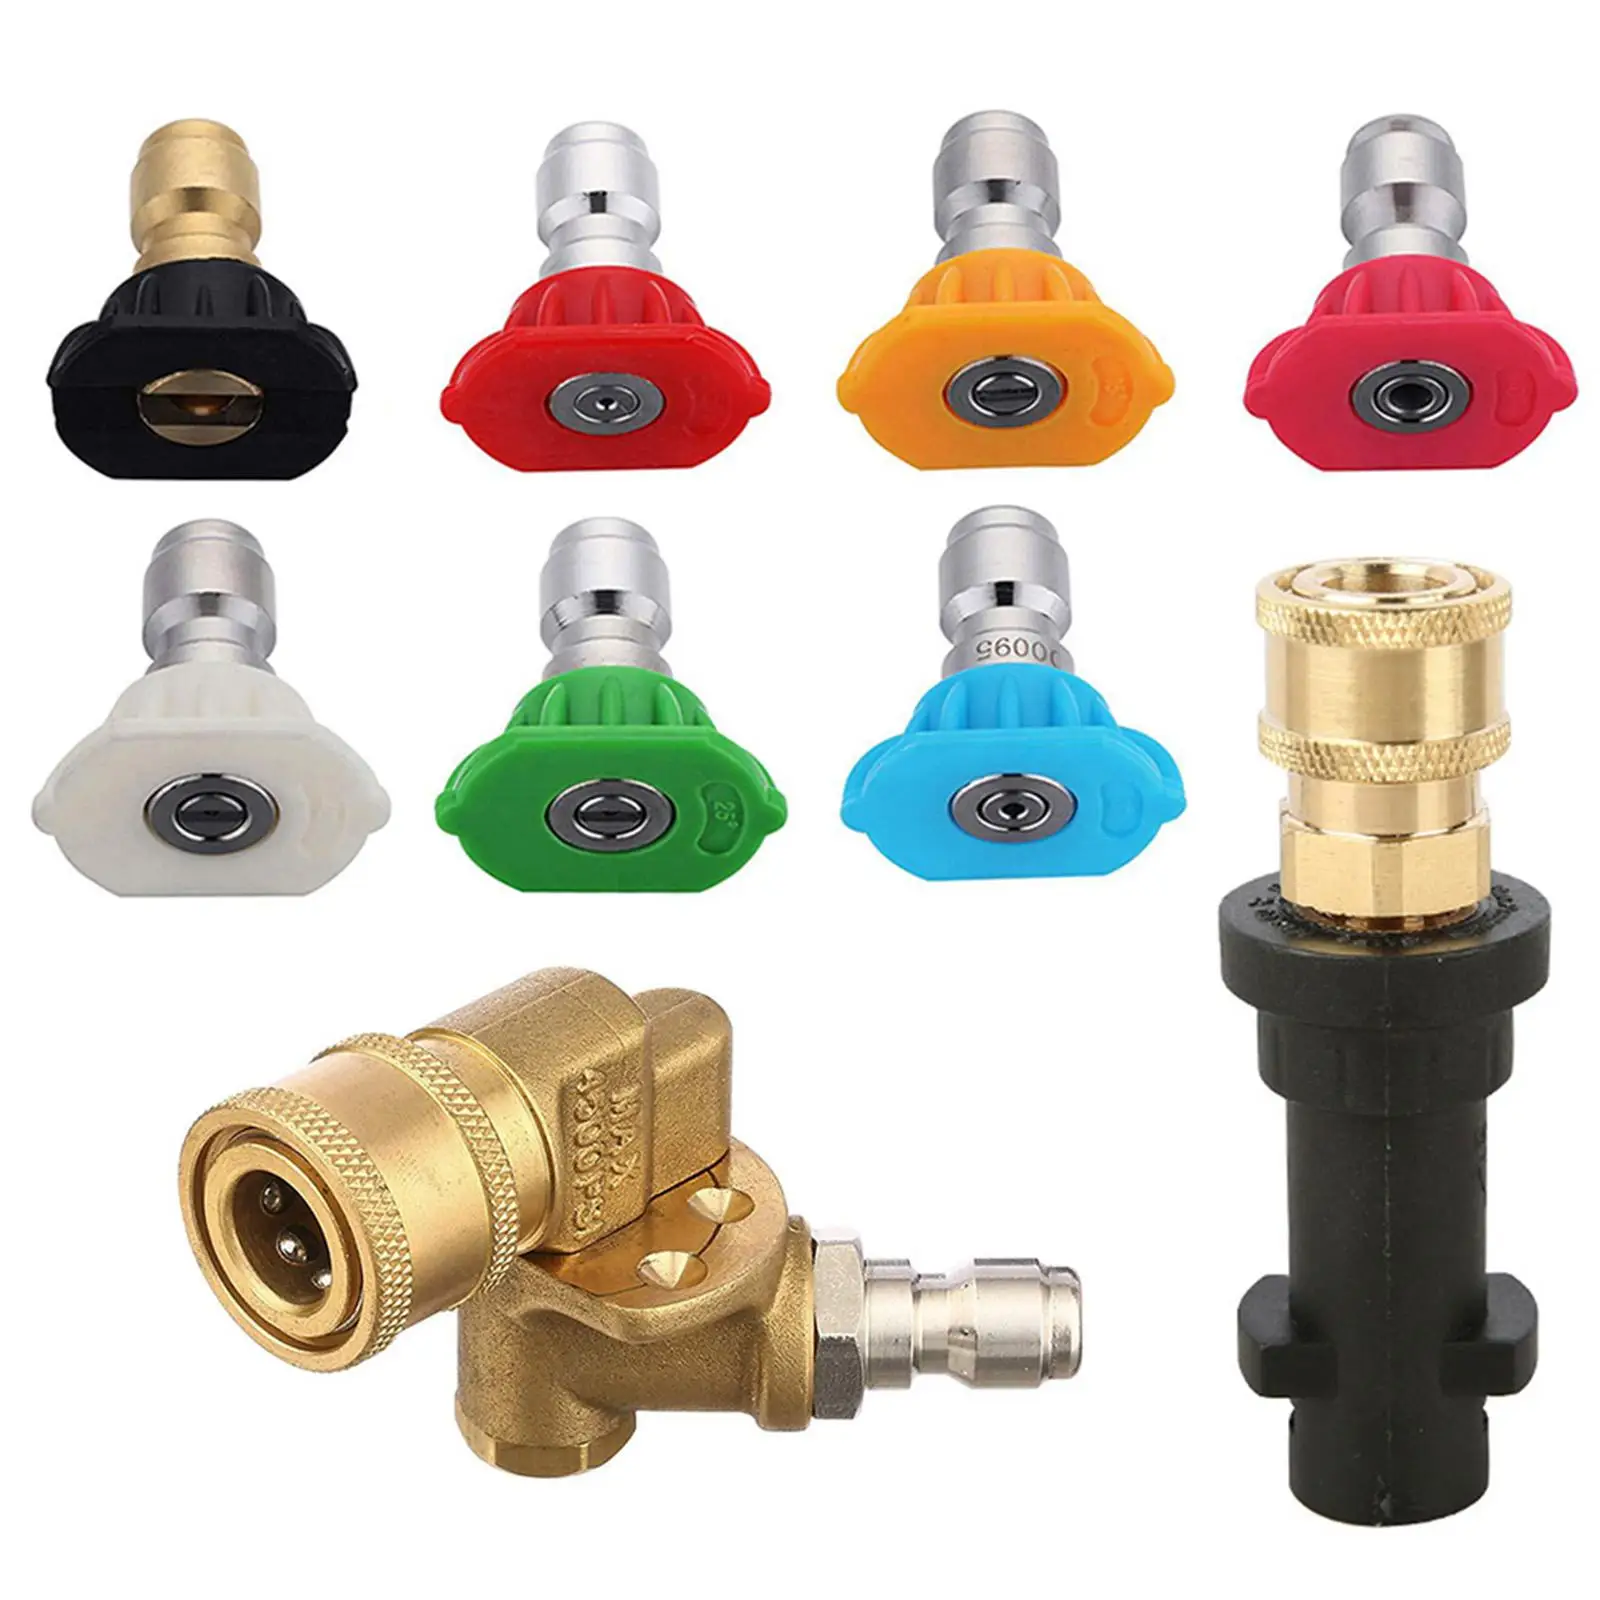 Professional Pressure Washing Adapter Kit Nozzle Tips Fittings 5 Angles Pivoting Coupler for K2 K7 K5